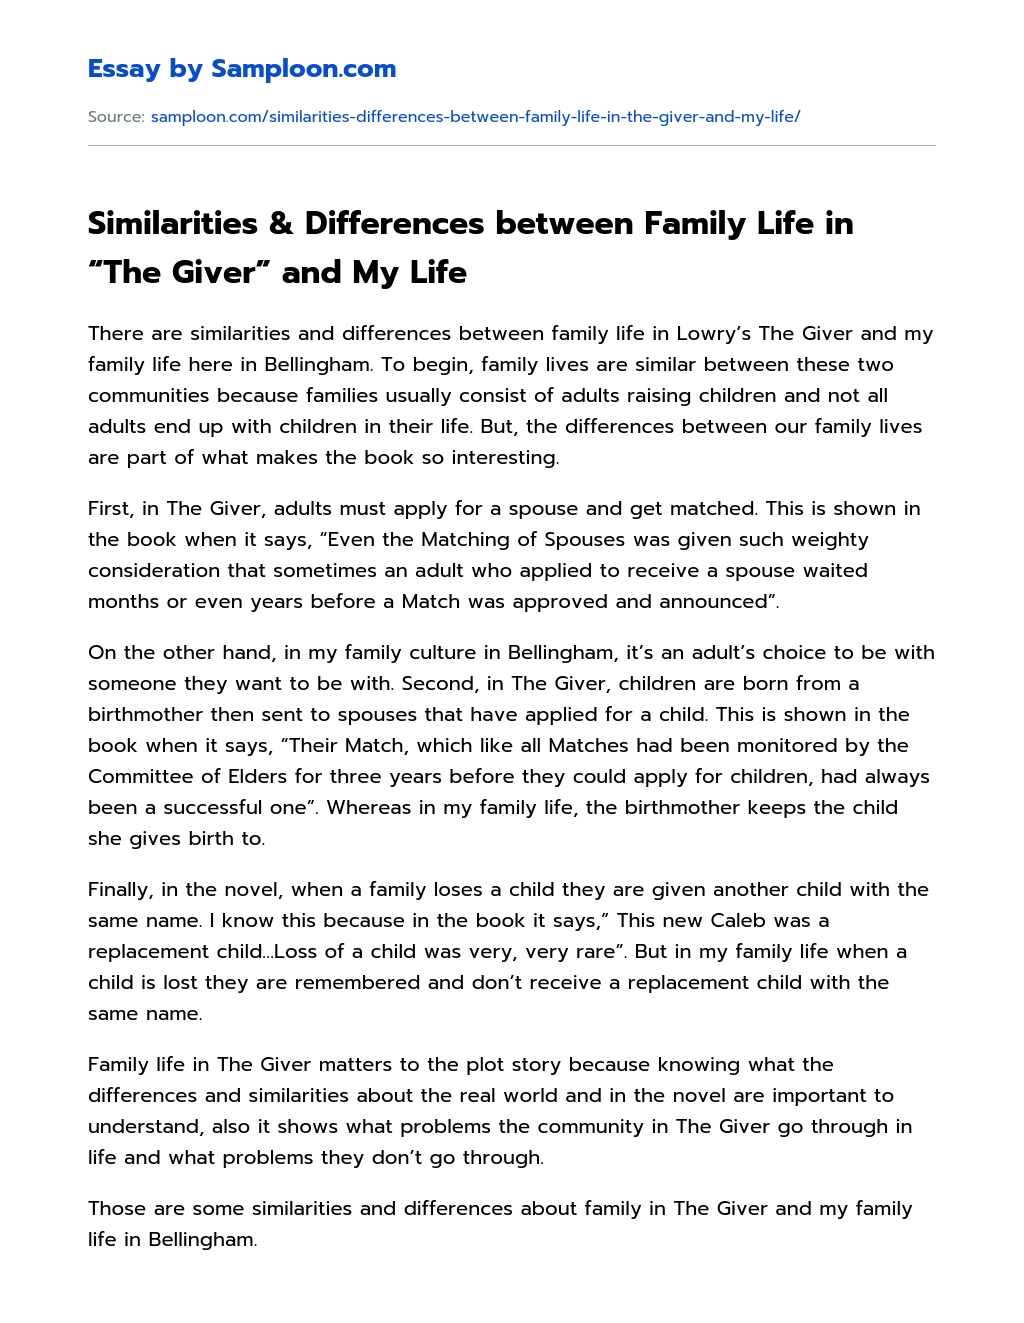 Similarities & Differences between Family Life in “The Giver” and My Life essay